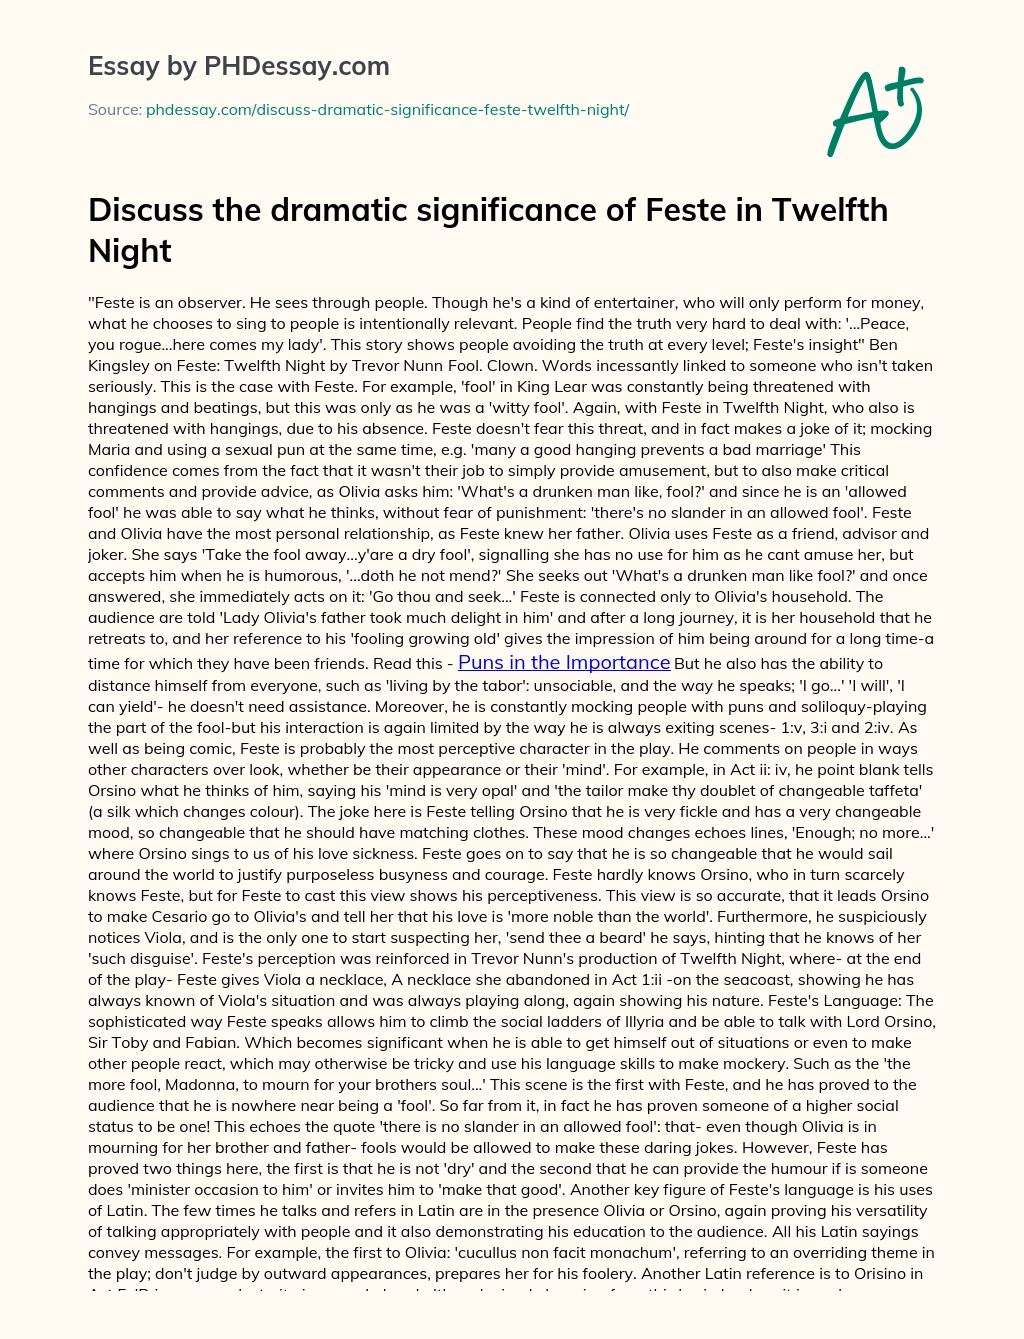 Discuss the dramatic significance of Feste in Twelfth Night essay